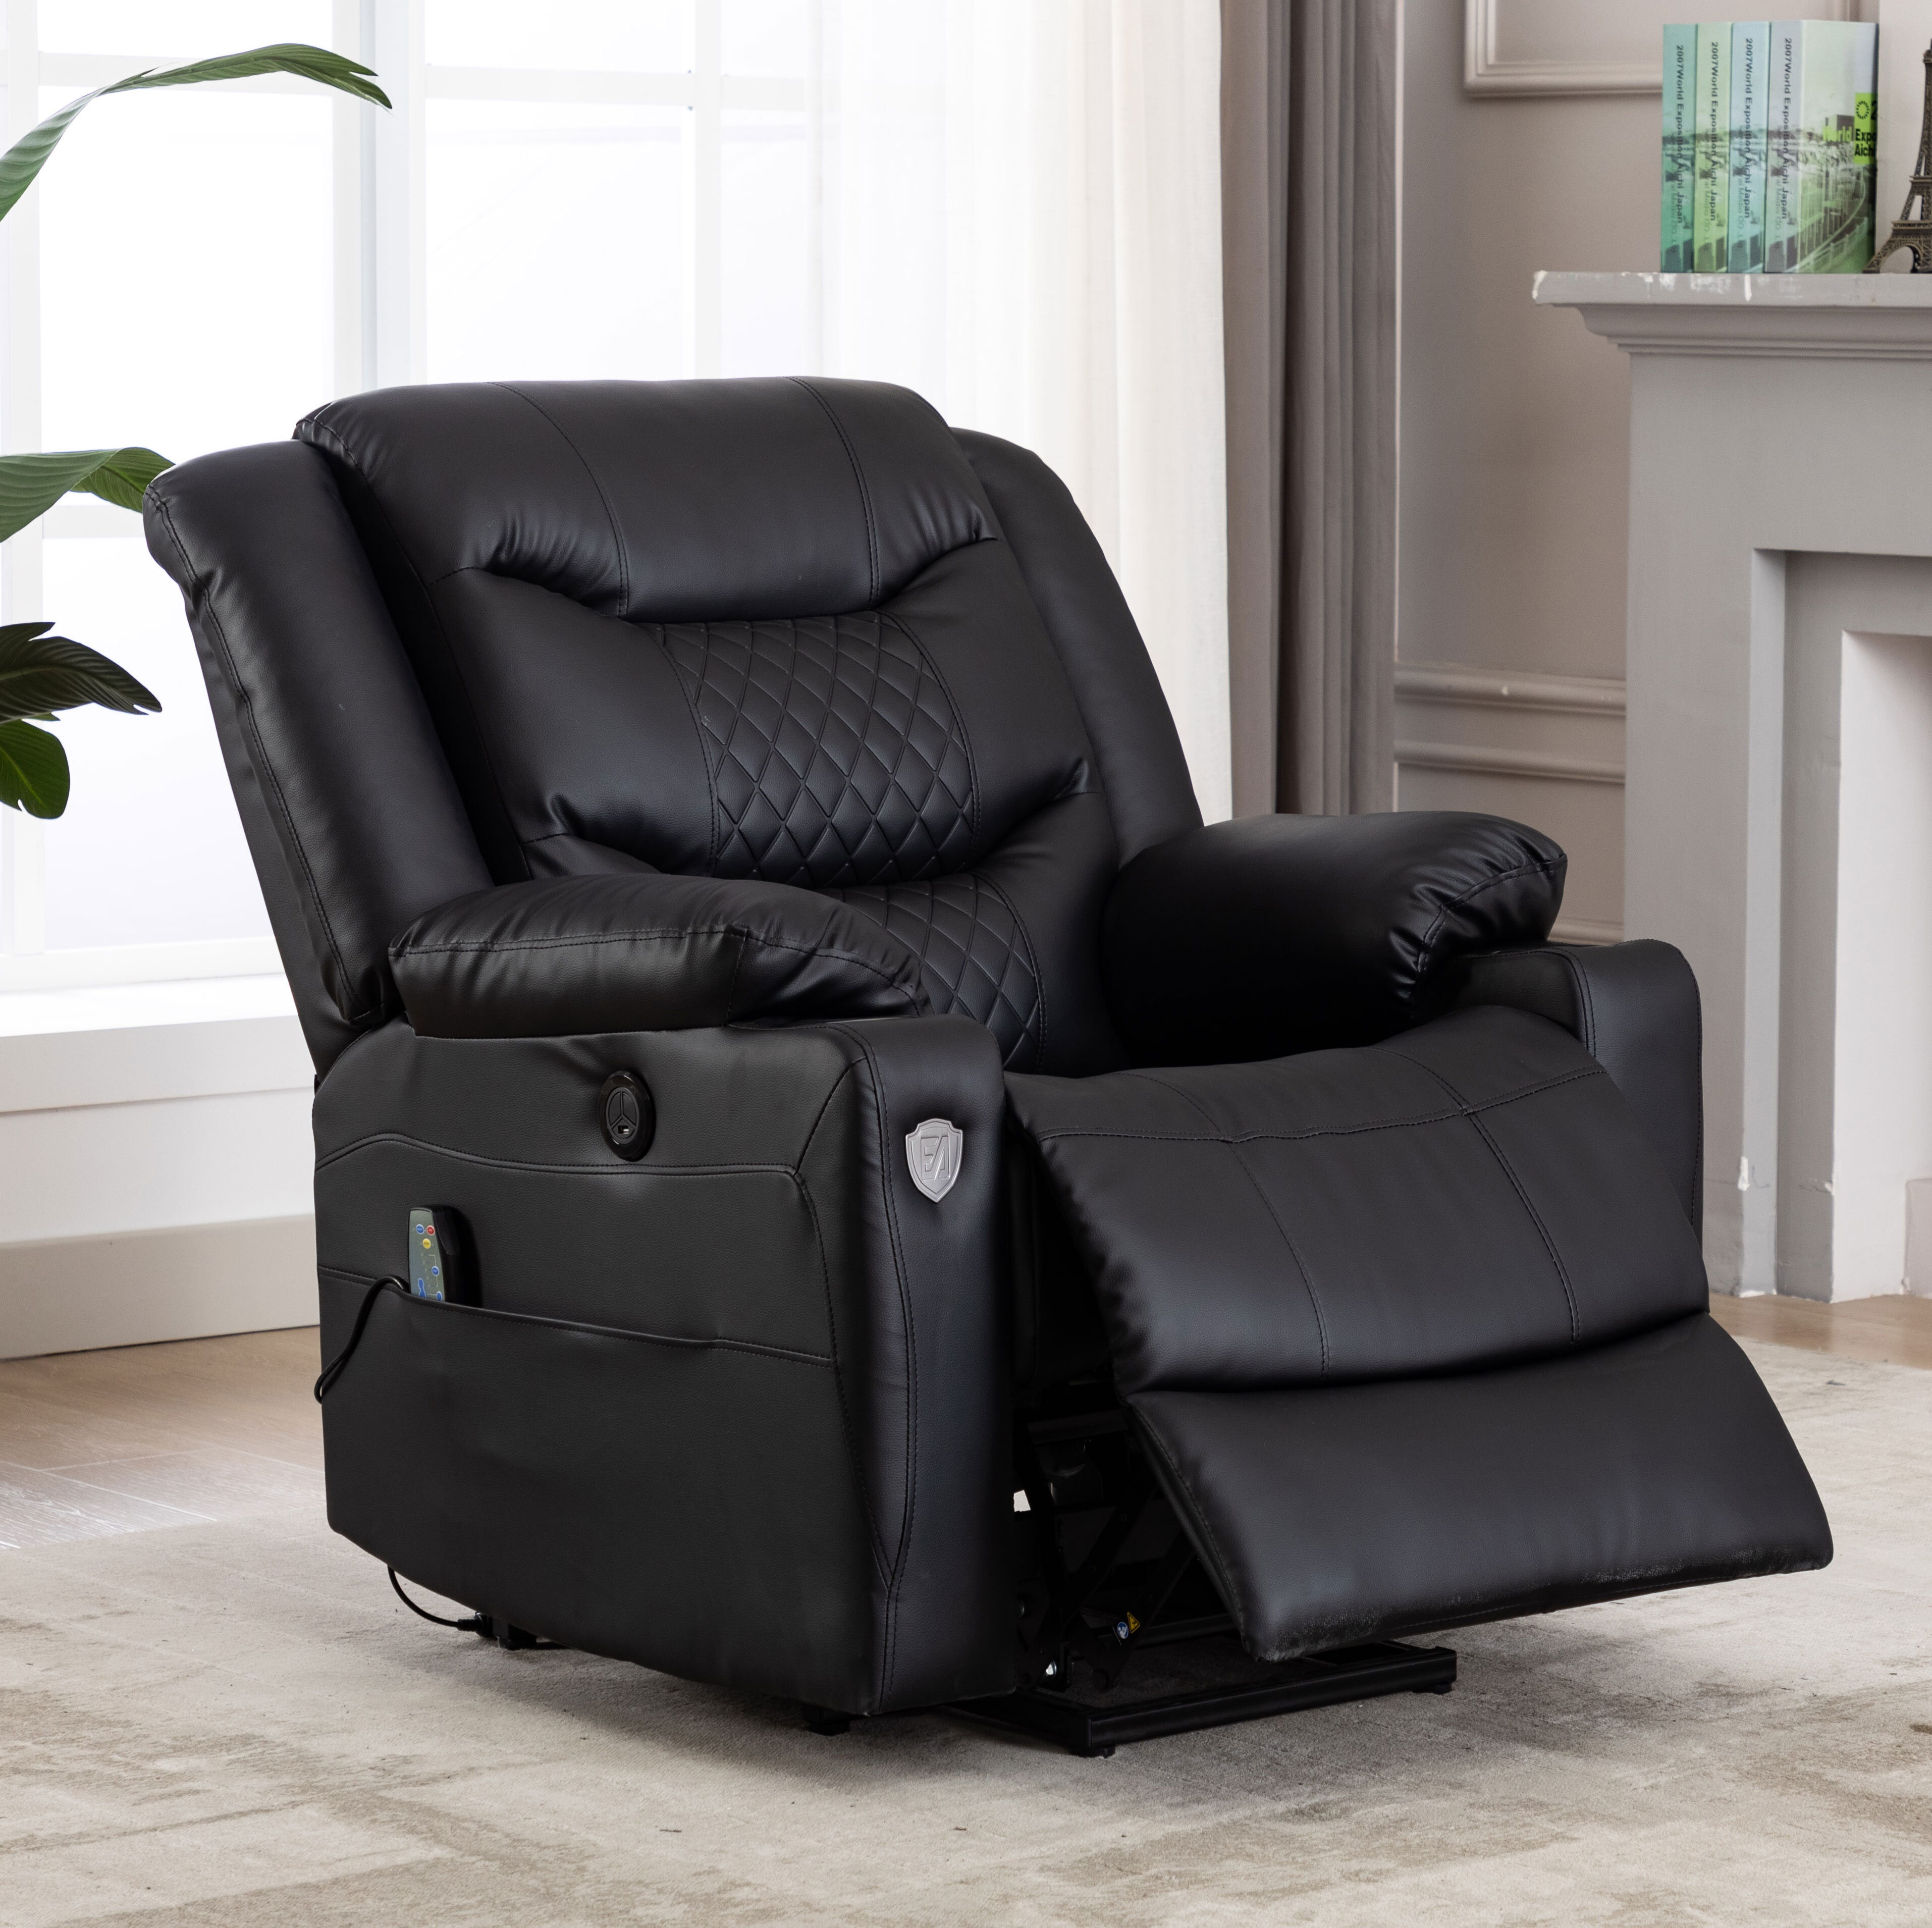 https://visualhunt.com/photos/23/kanajah-power-lift-recliner-lift-chairs-recliners-for-elderly-heat-and-massage-by-remote-control.jpg